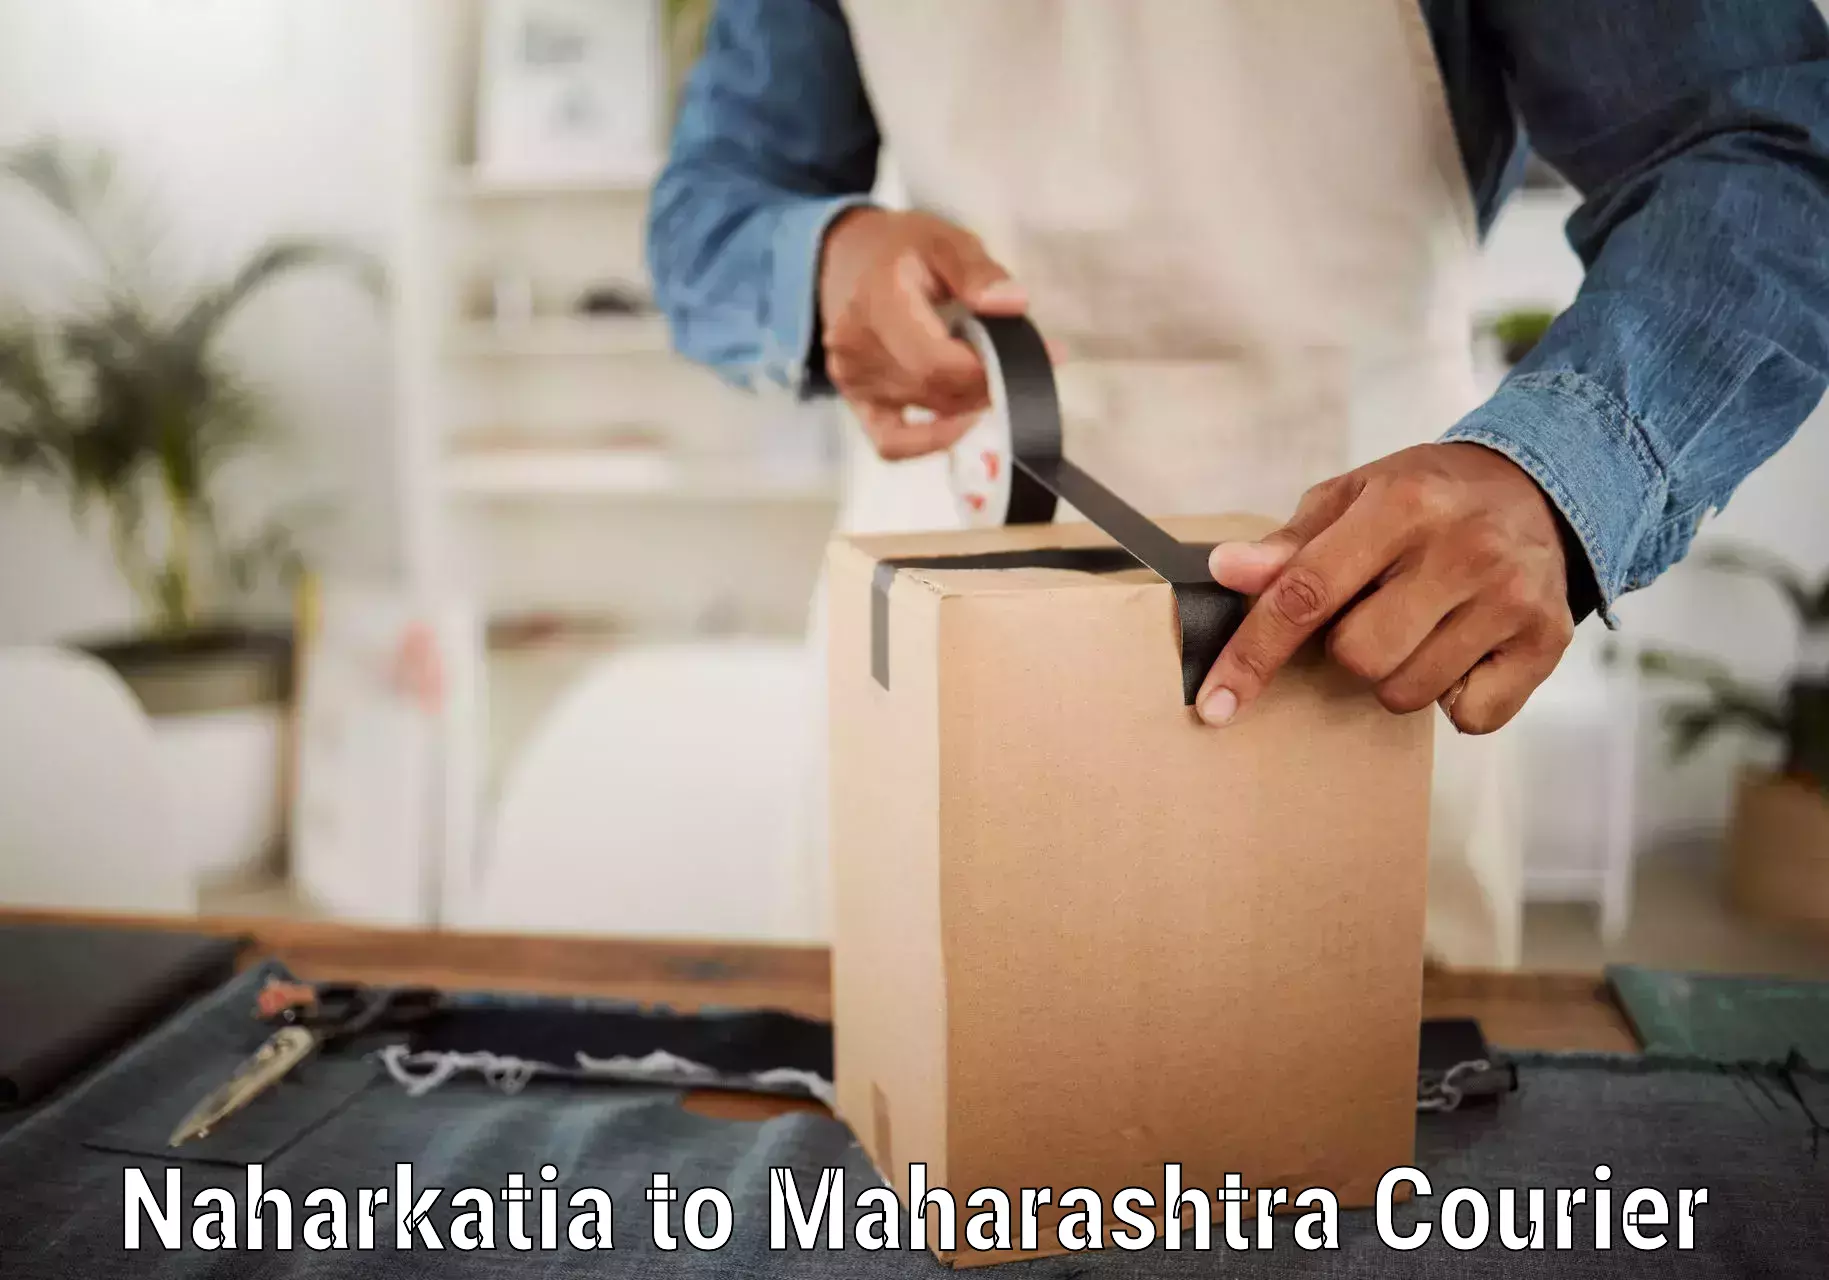 Quick courier services in Naharkatia to Pune